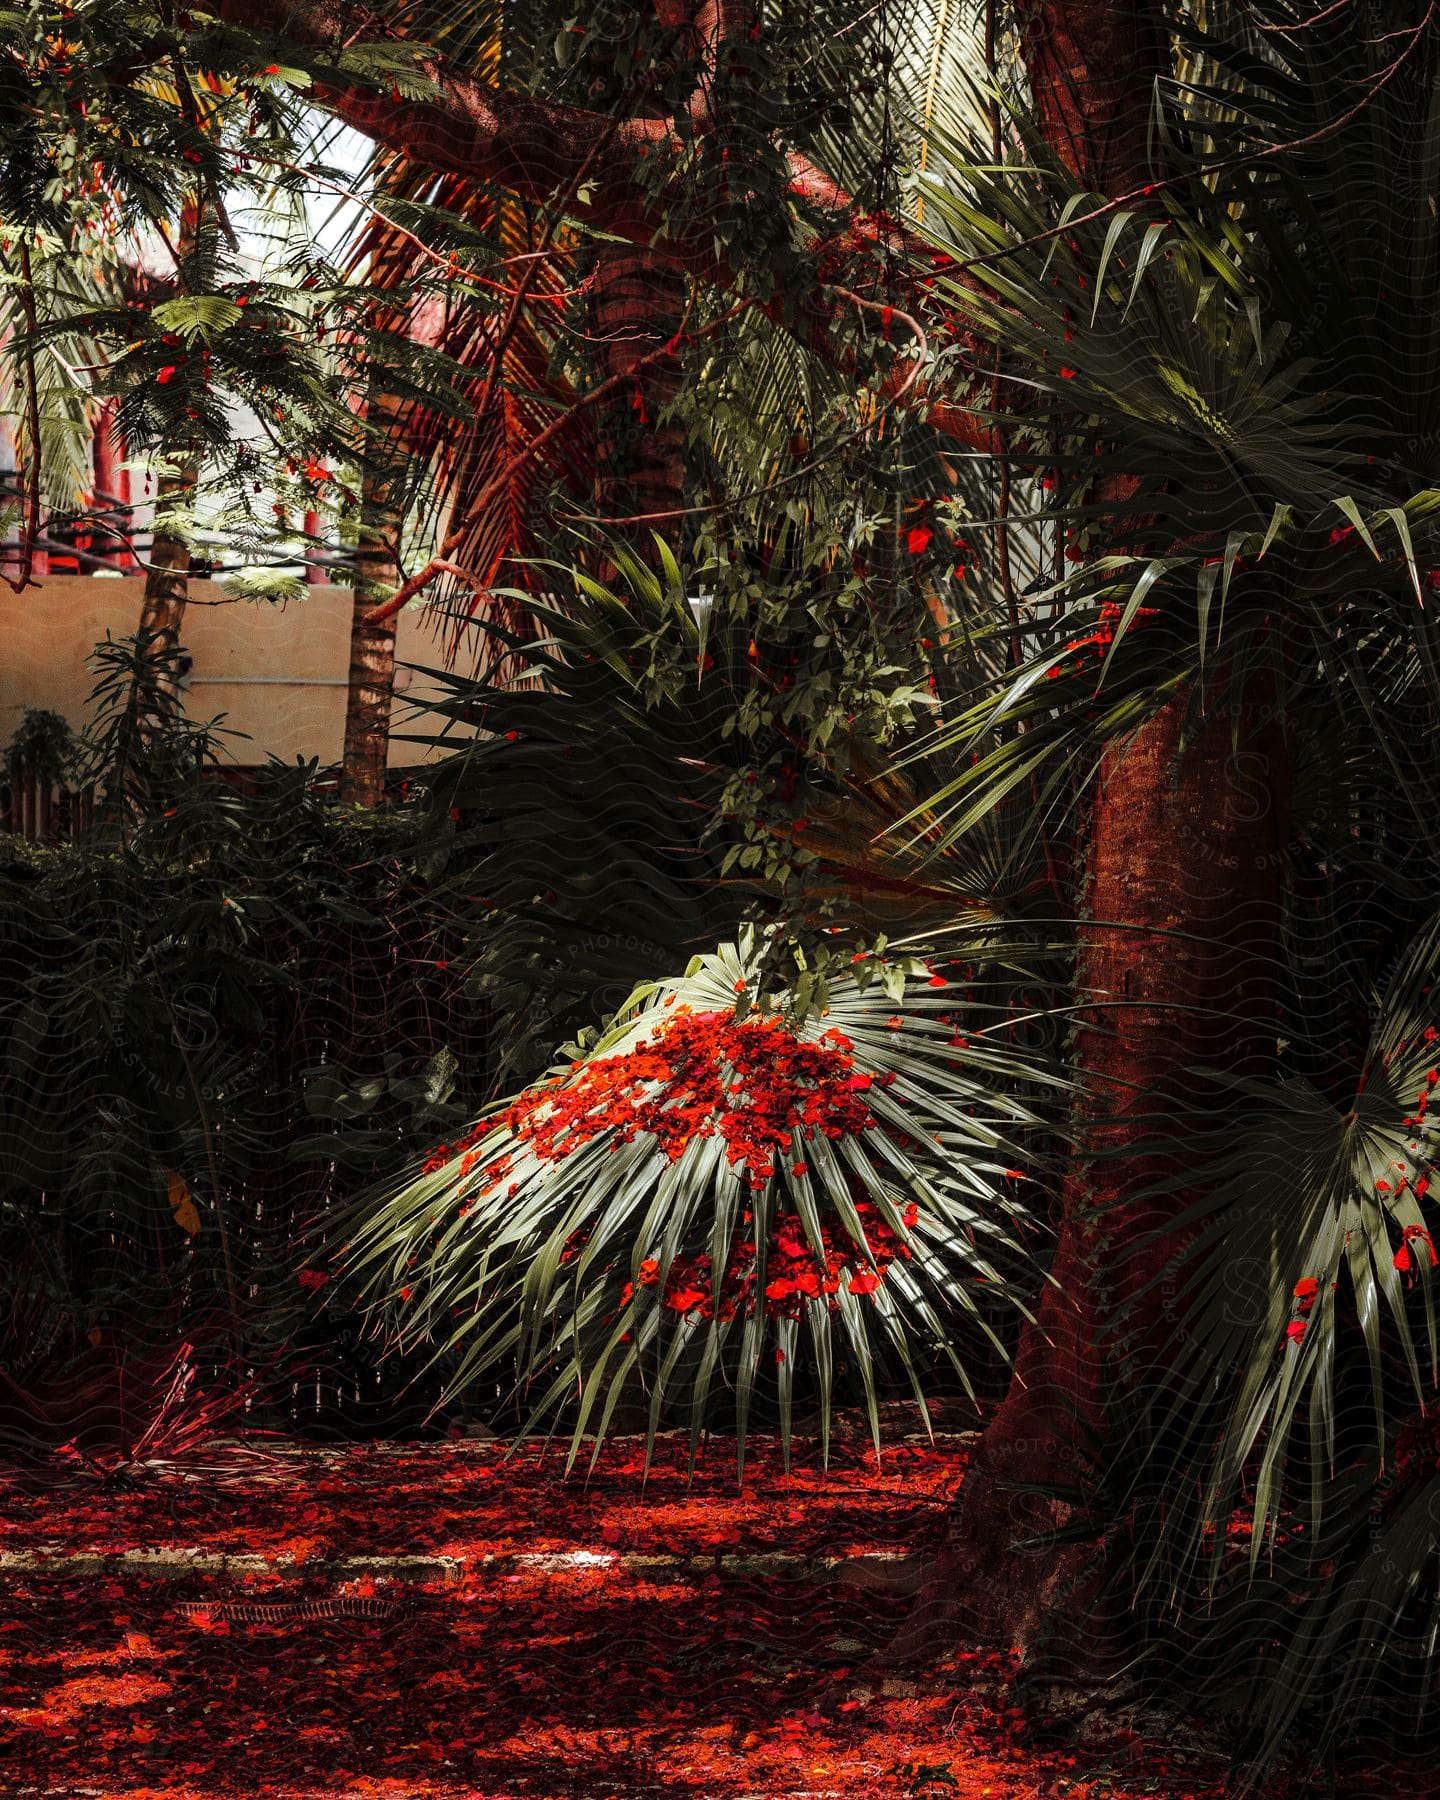 a palm tree with several red leaves scattered on the ground beneath it in a yard